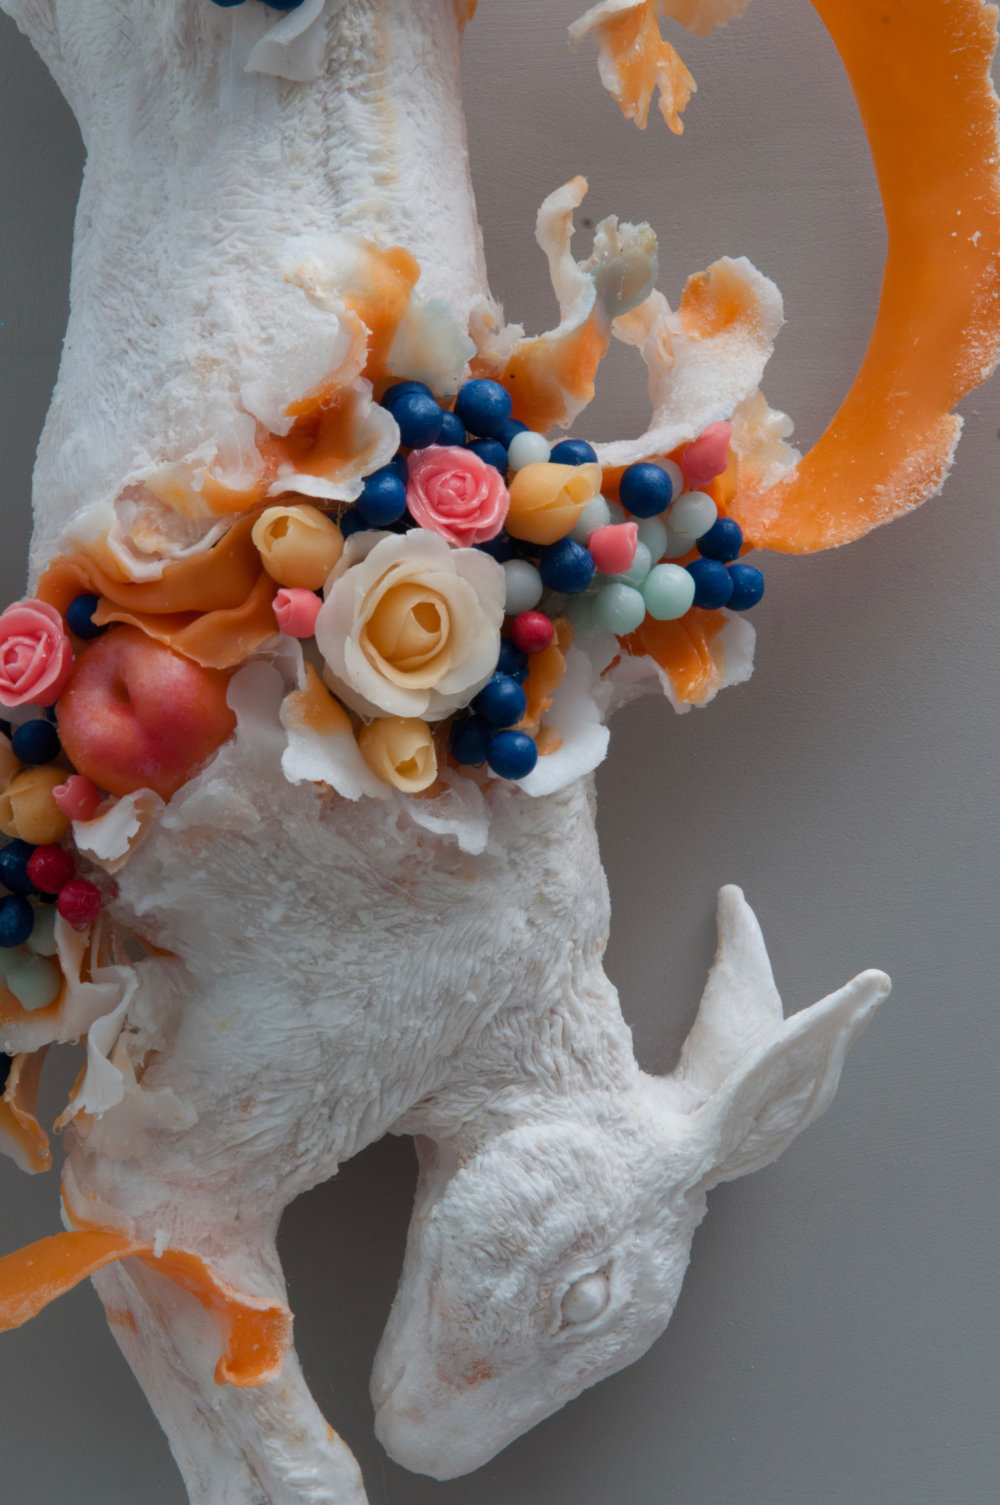 Beautifully Grotesque Disquieting Wax Sculptures Flower Decorated By Rebecca Stevenson 3